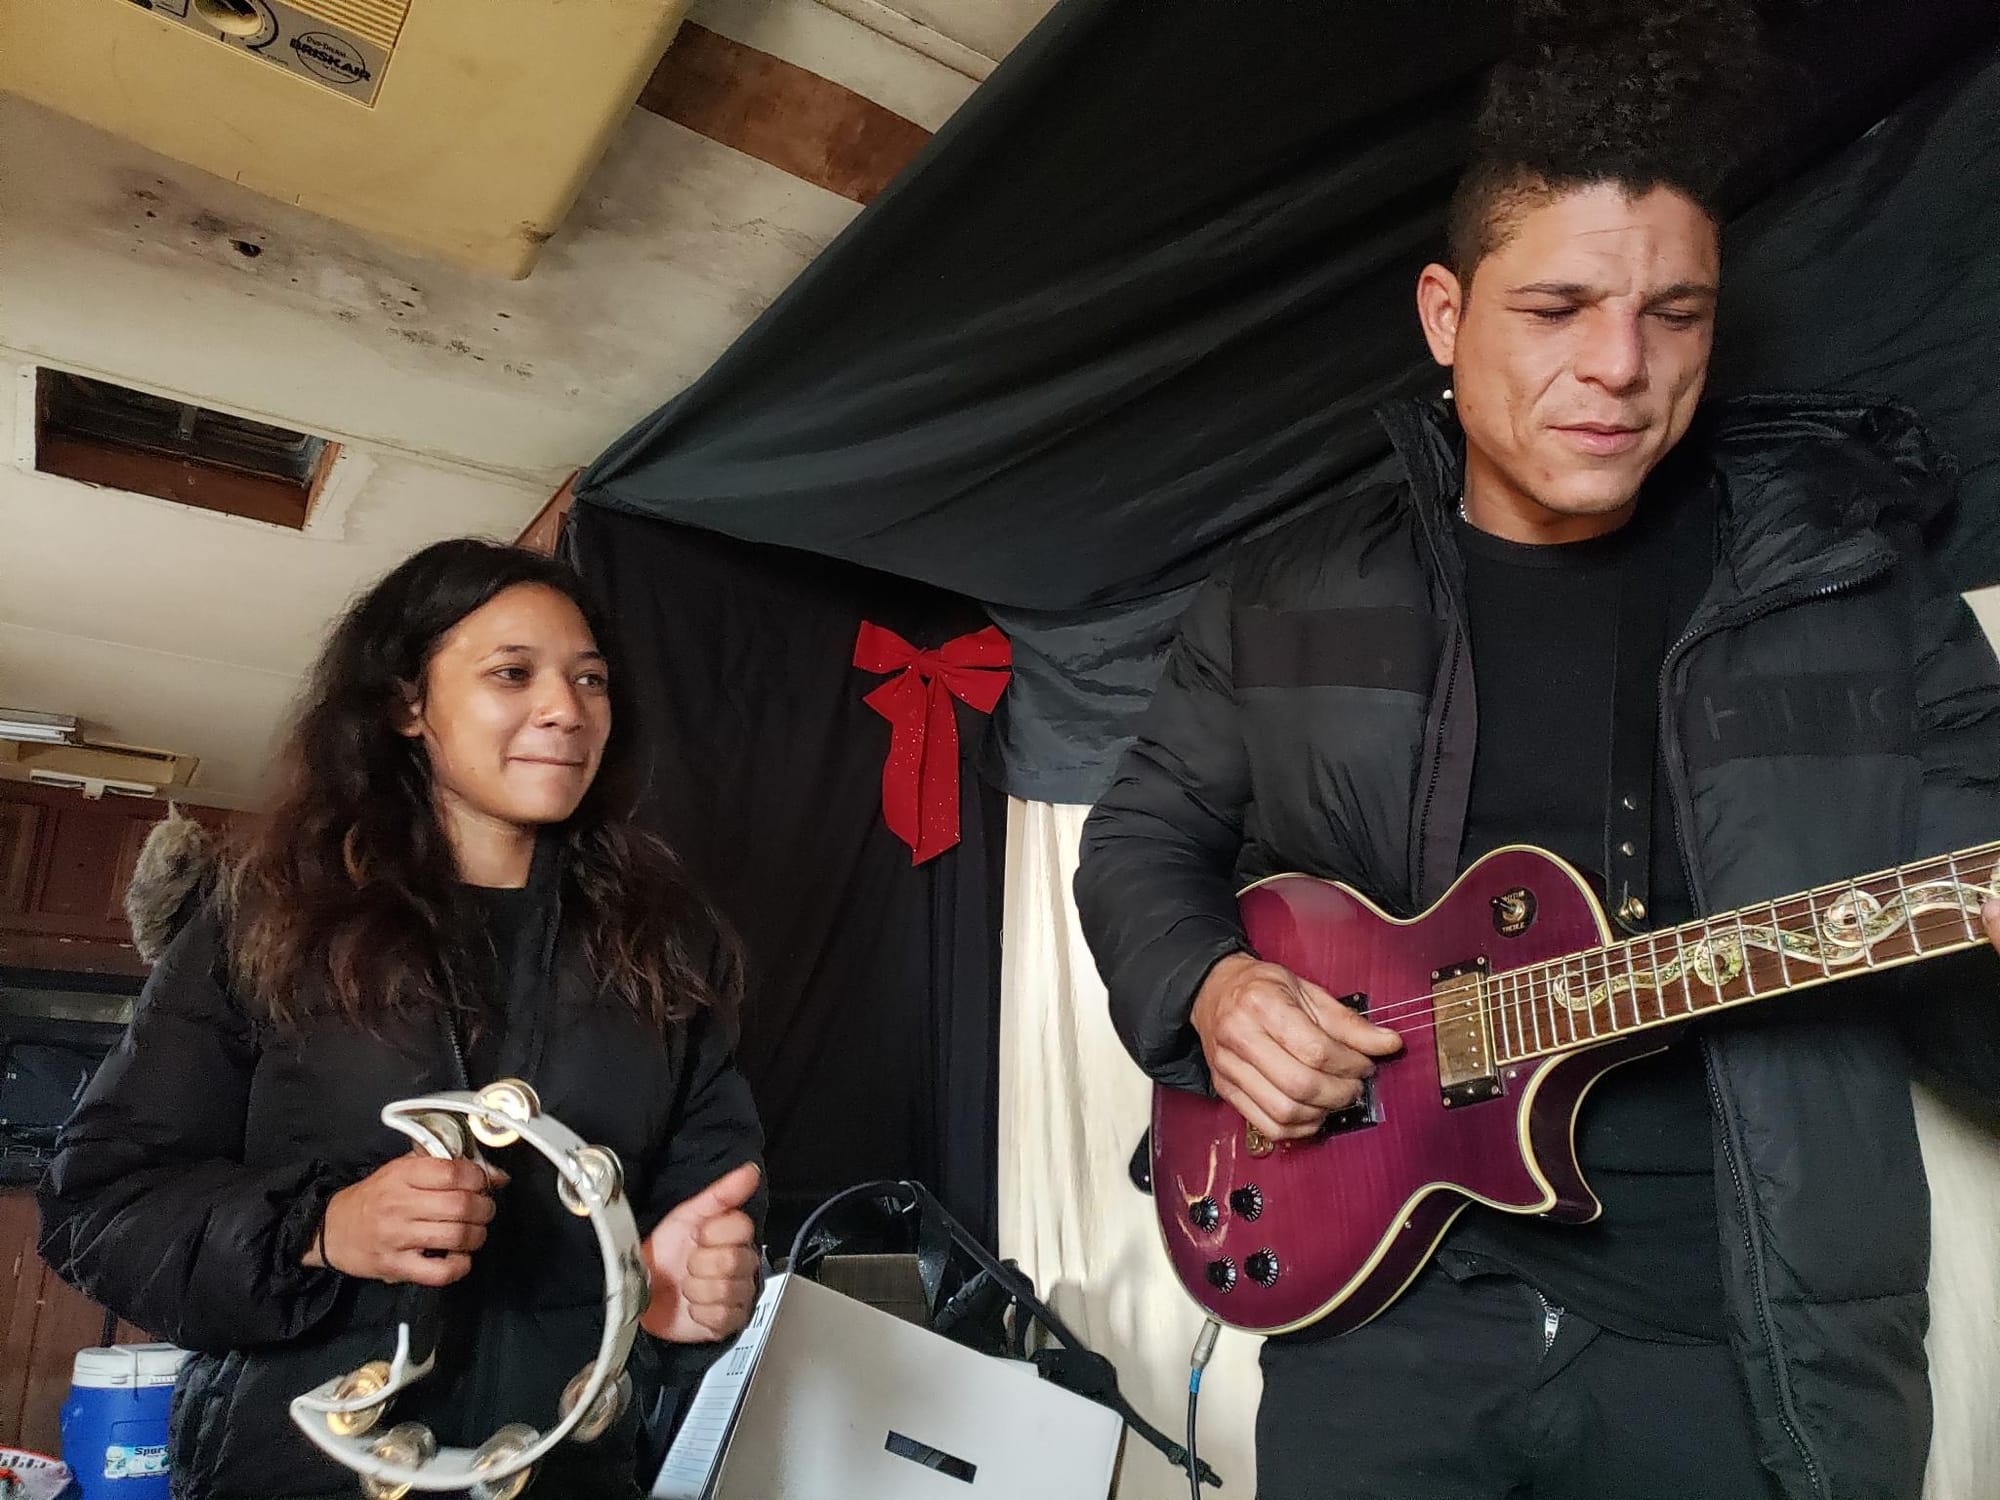 Simar Pacedo Solorzano and Jose Campos Cordova play music in their RV at Vallejo's boat launch. 